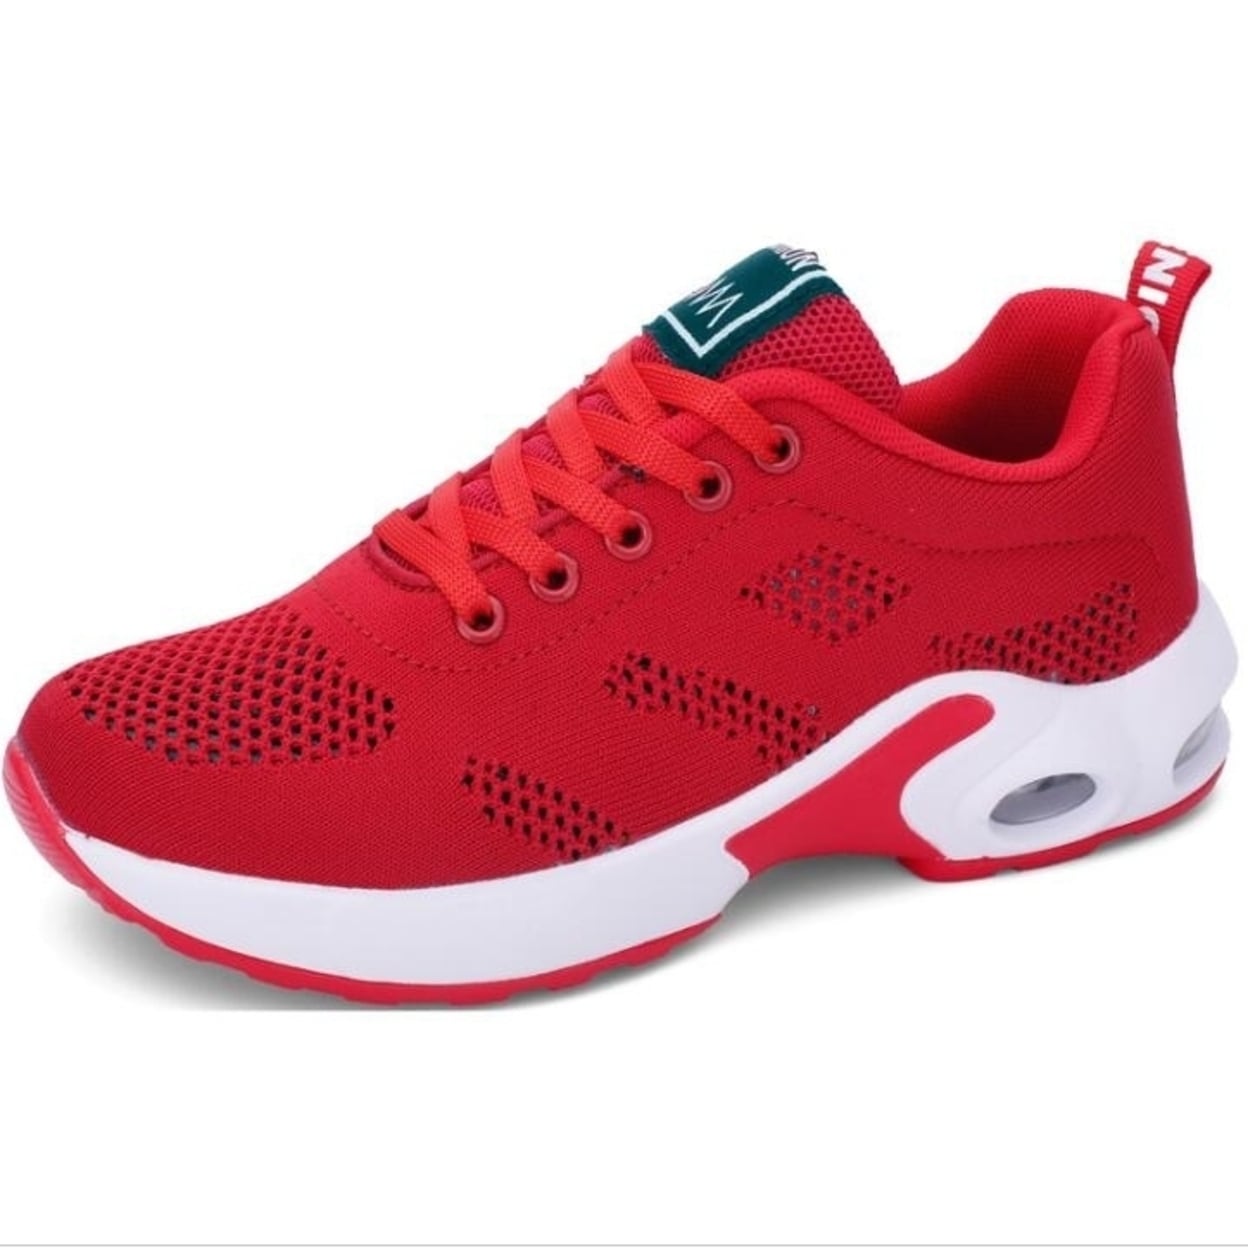 mesh athletic shoes